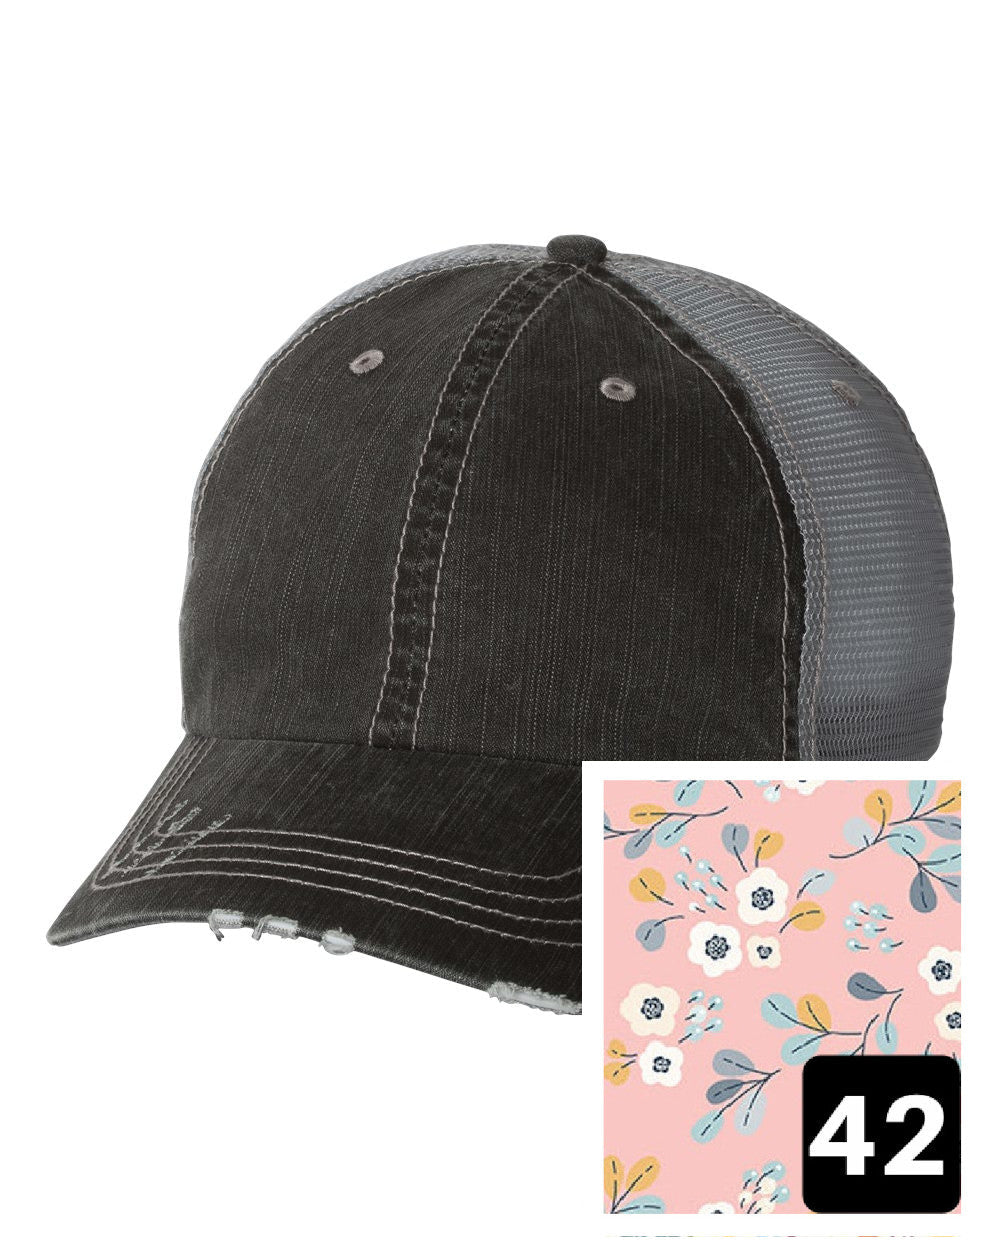 gray distressed trucker hat with light blue and pink mosaic fabric state of Wisconsin